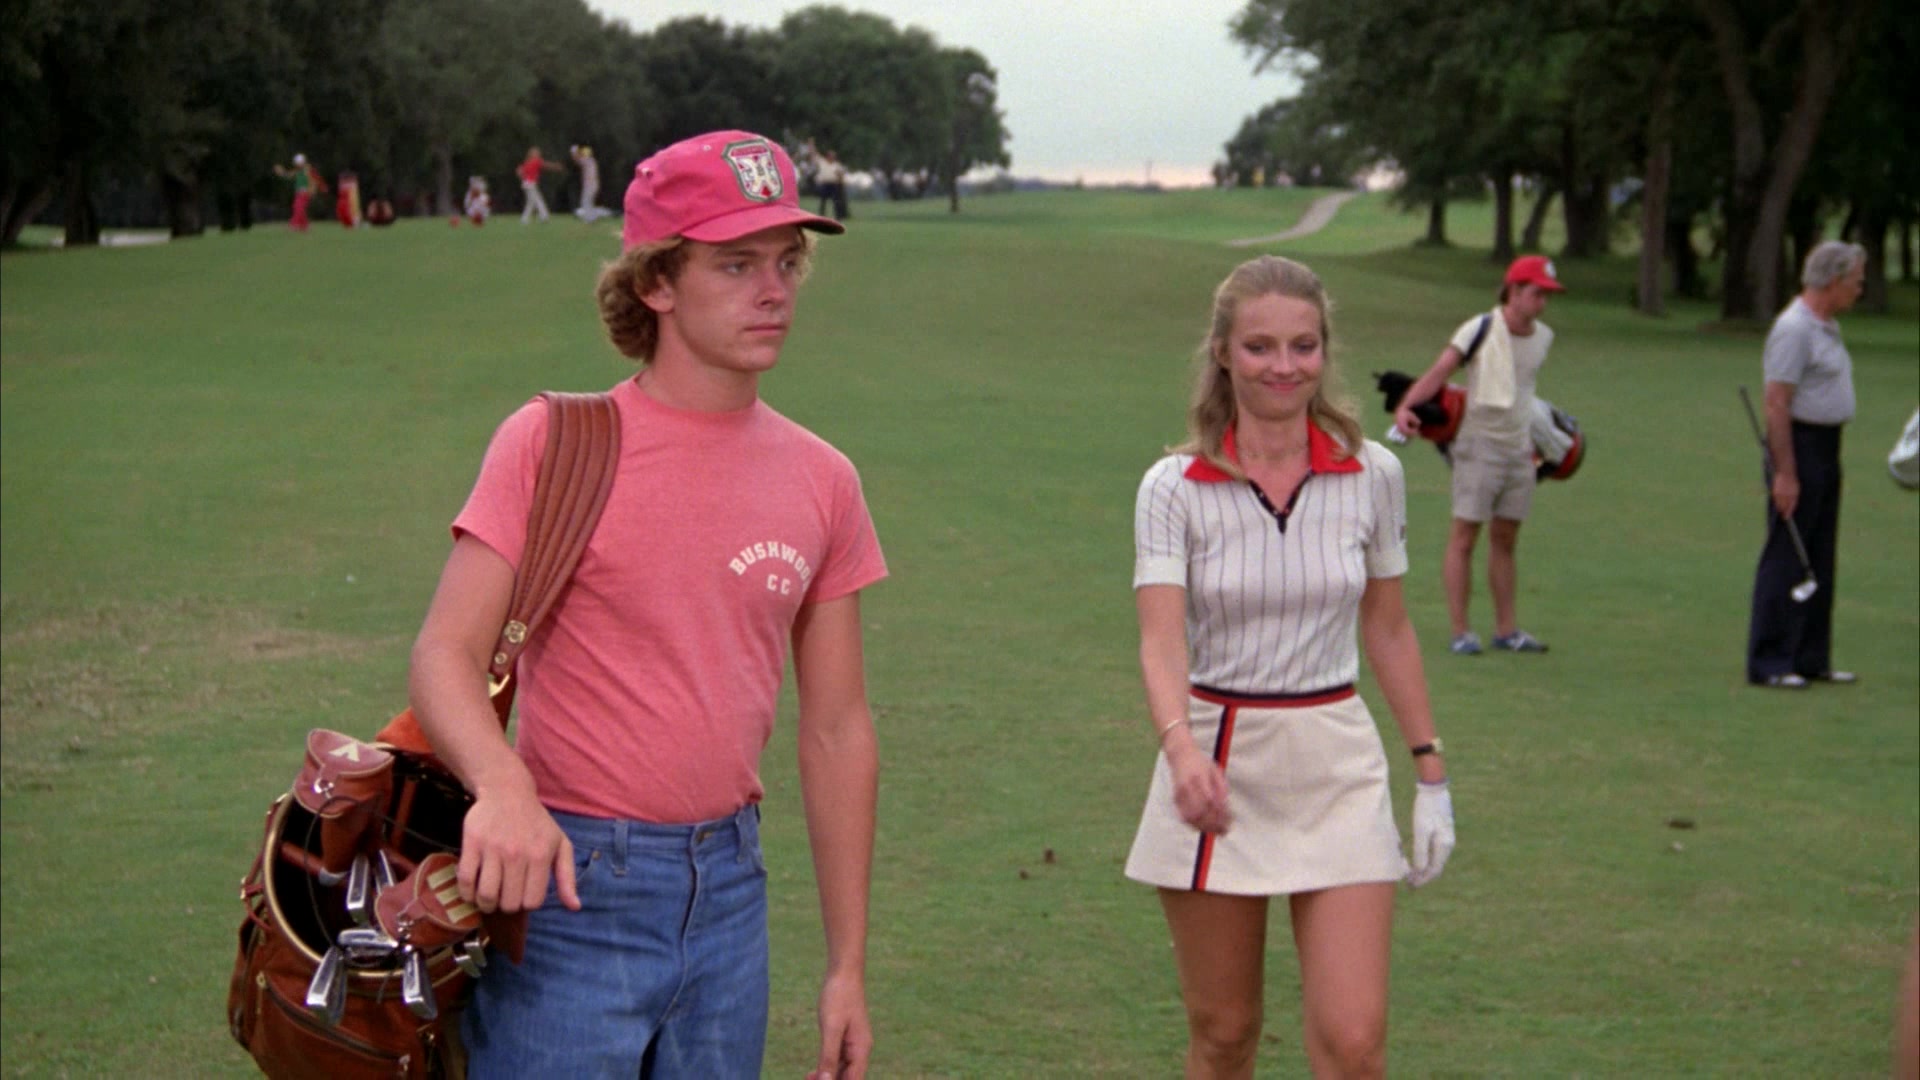 Fila Women's Polo Shirt And Skirt Worn By Cindy Morgan In Caddyshack (...